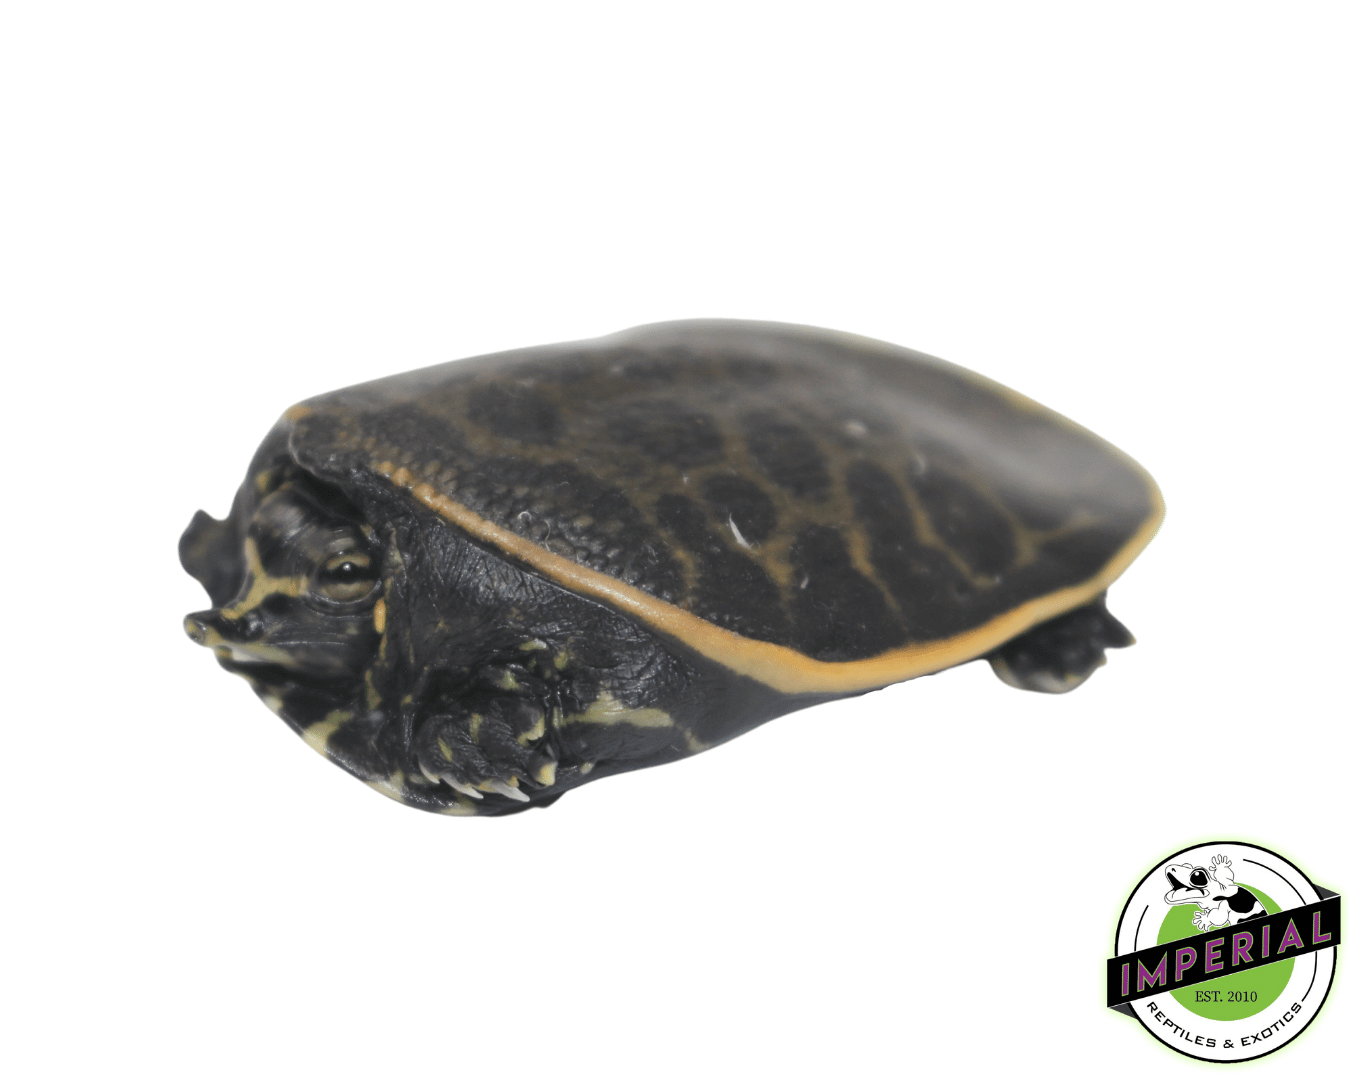 softshell turtle for sale online, buy soft shell turtles near me at cheap prices